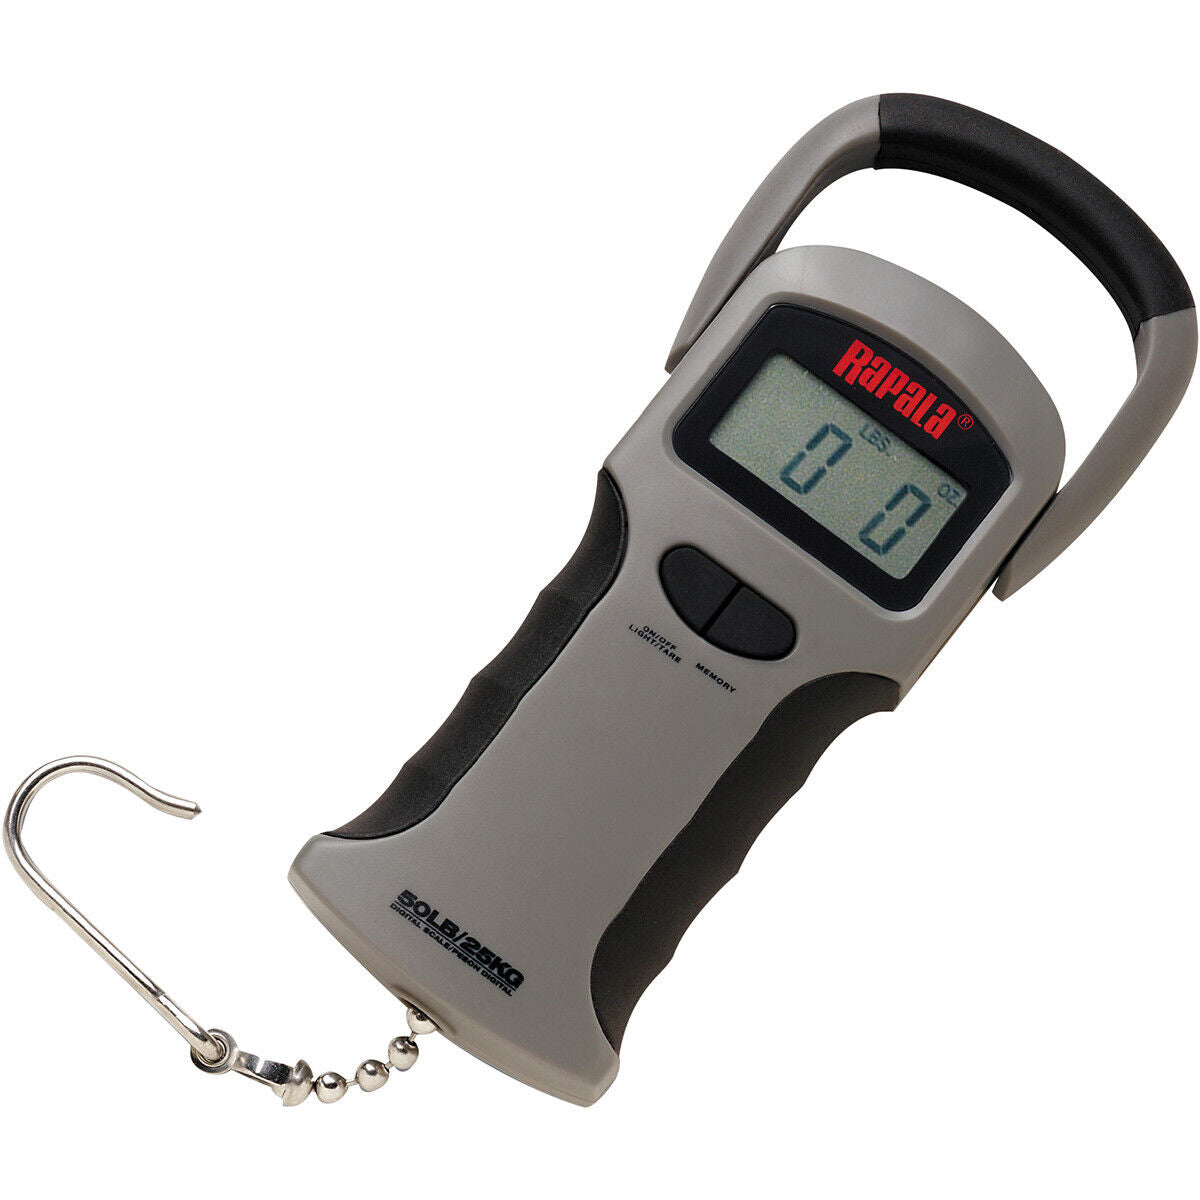 Fish Scales, Digital Fish Scales & Measuring Devices